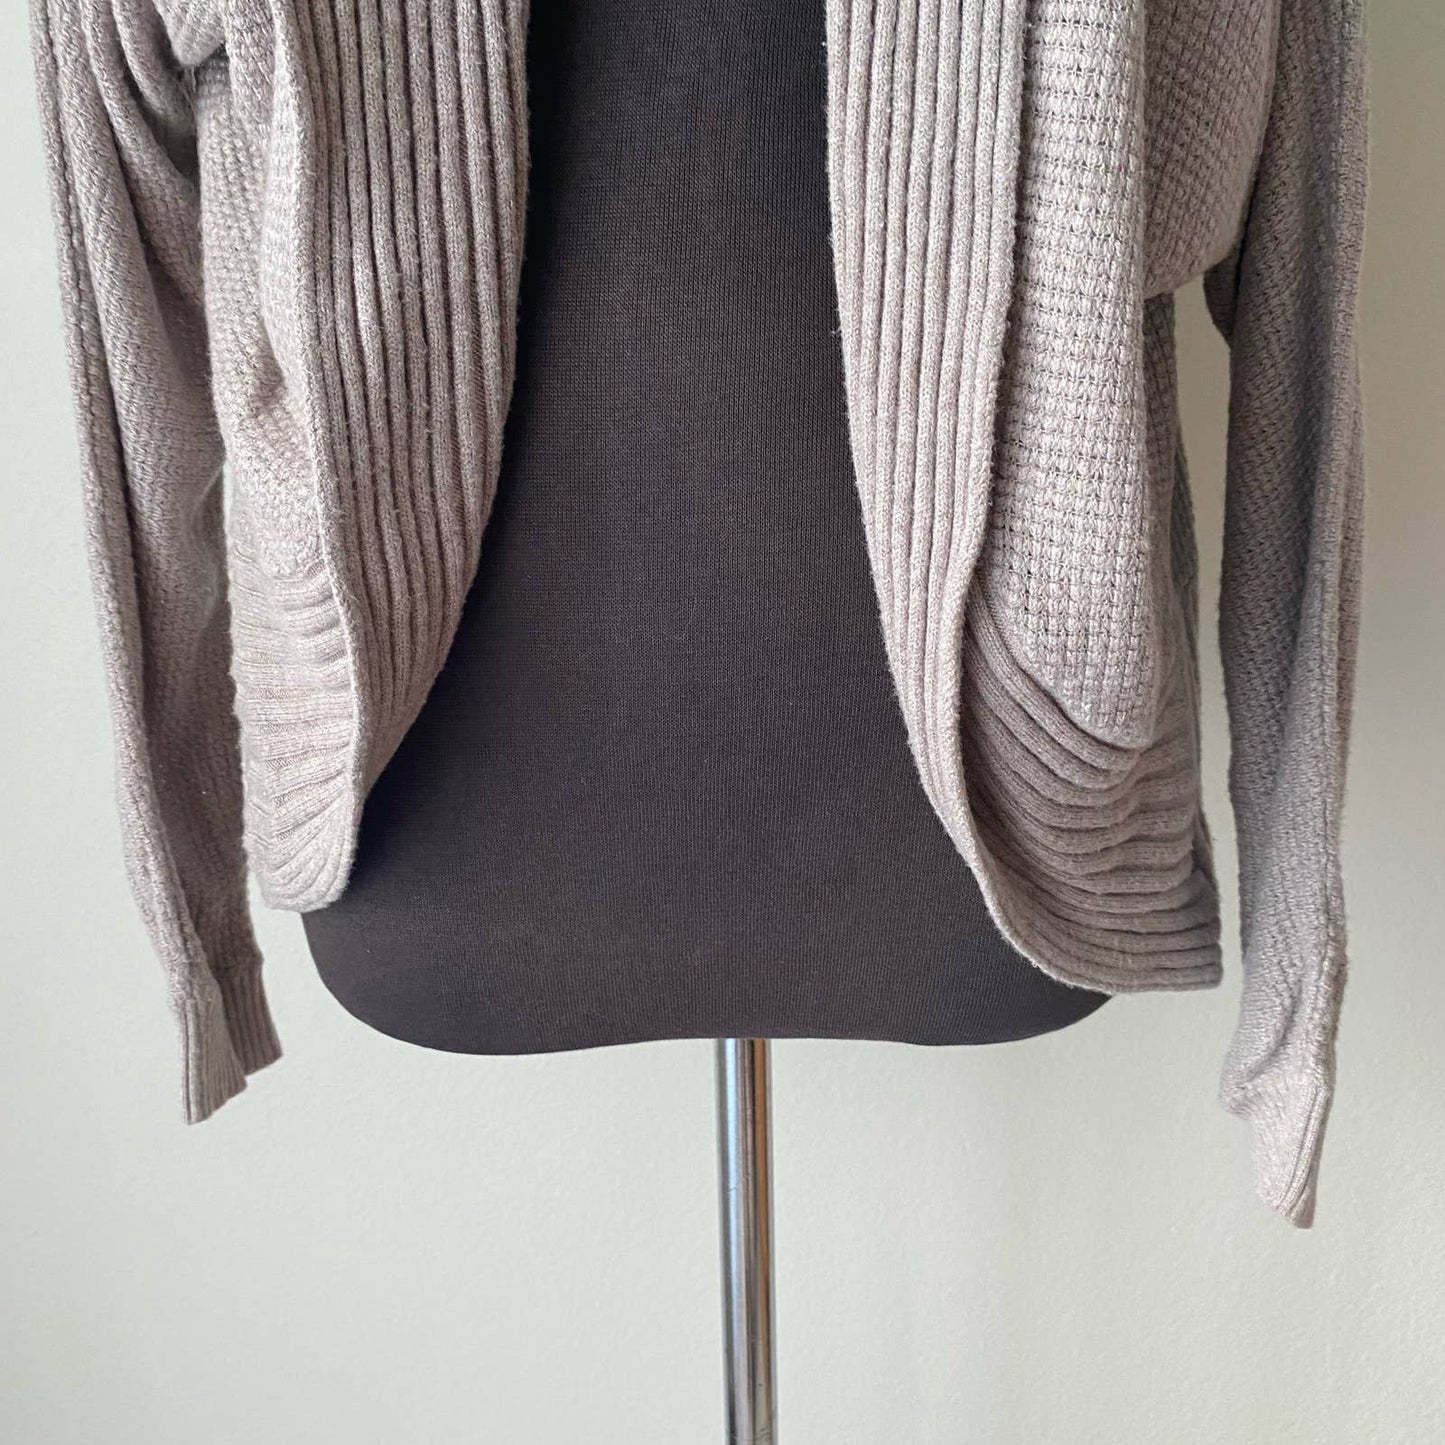 Express sz S waffle knit hooded open cotton cardigan